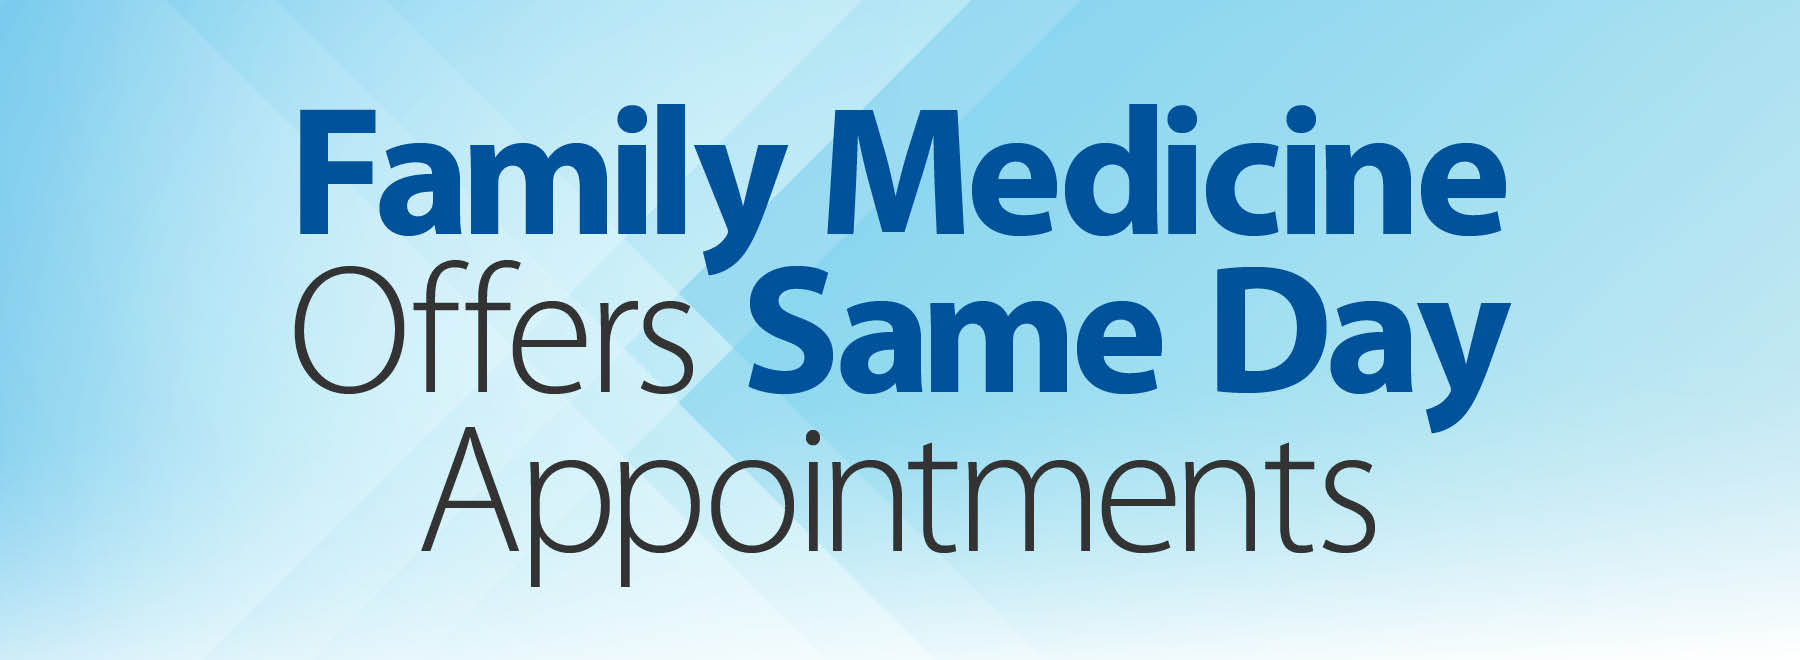 Family Medicine Offers Same Day Appointments